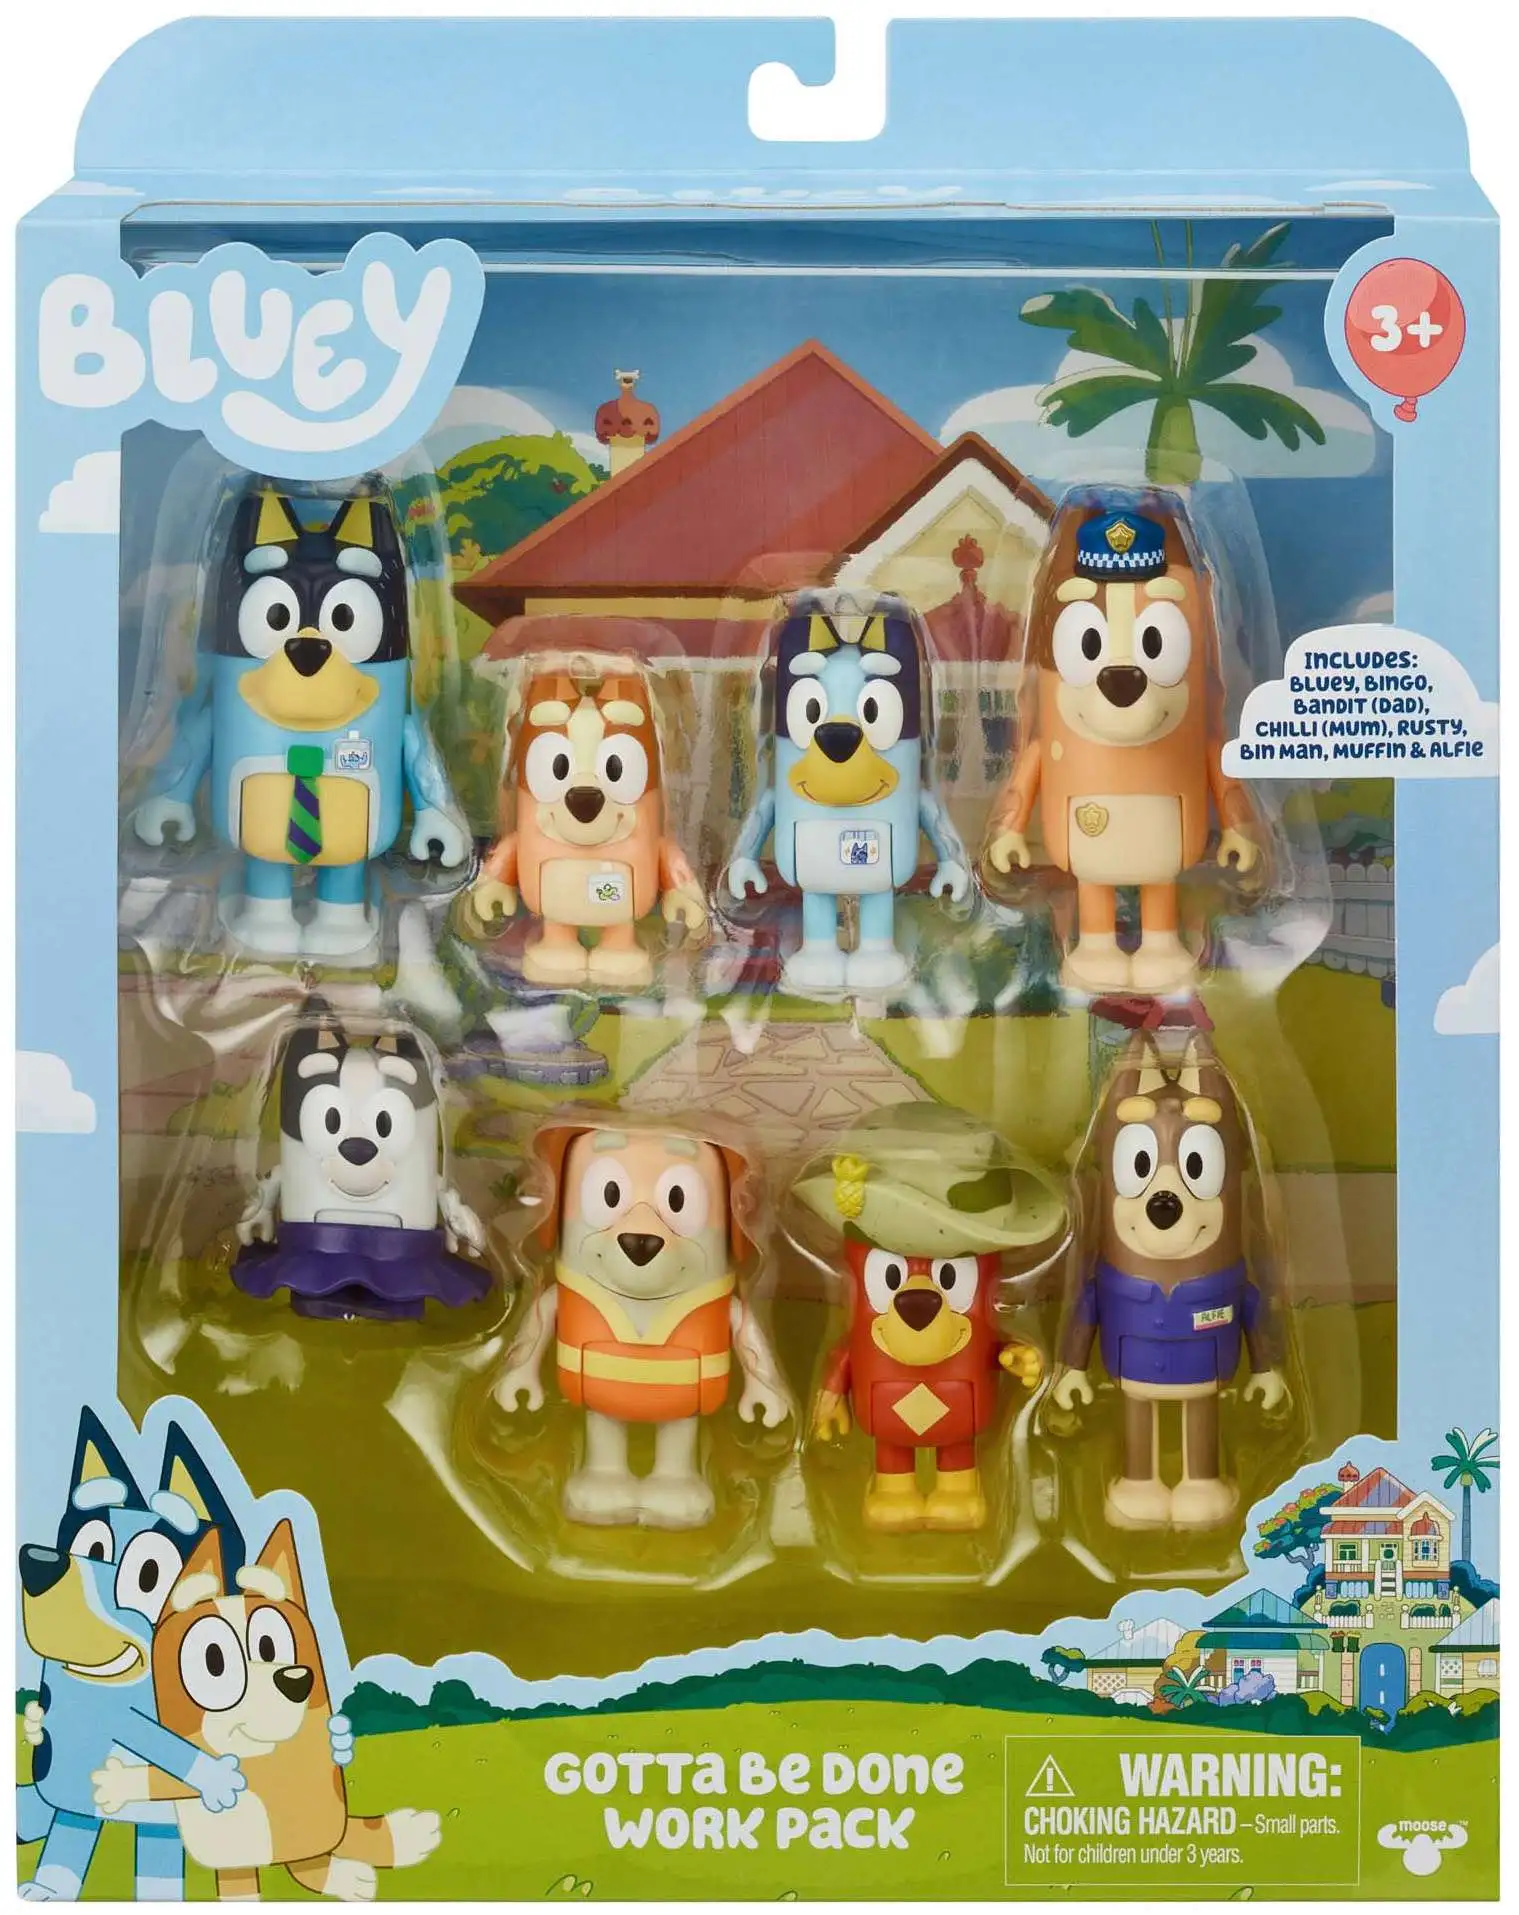 Must-have Bluey toys